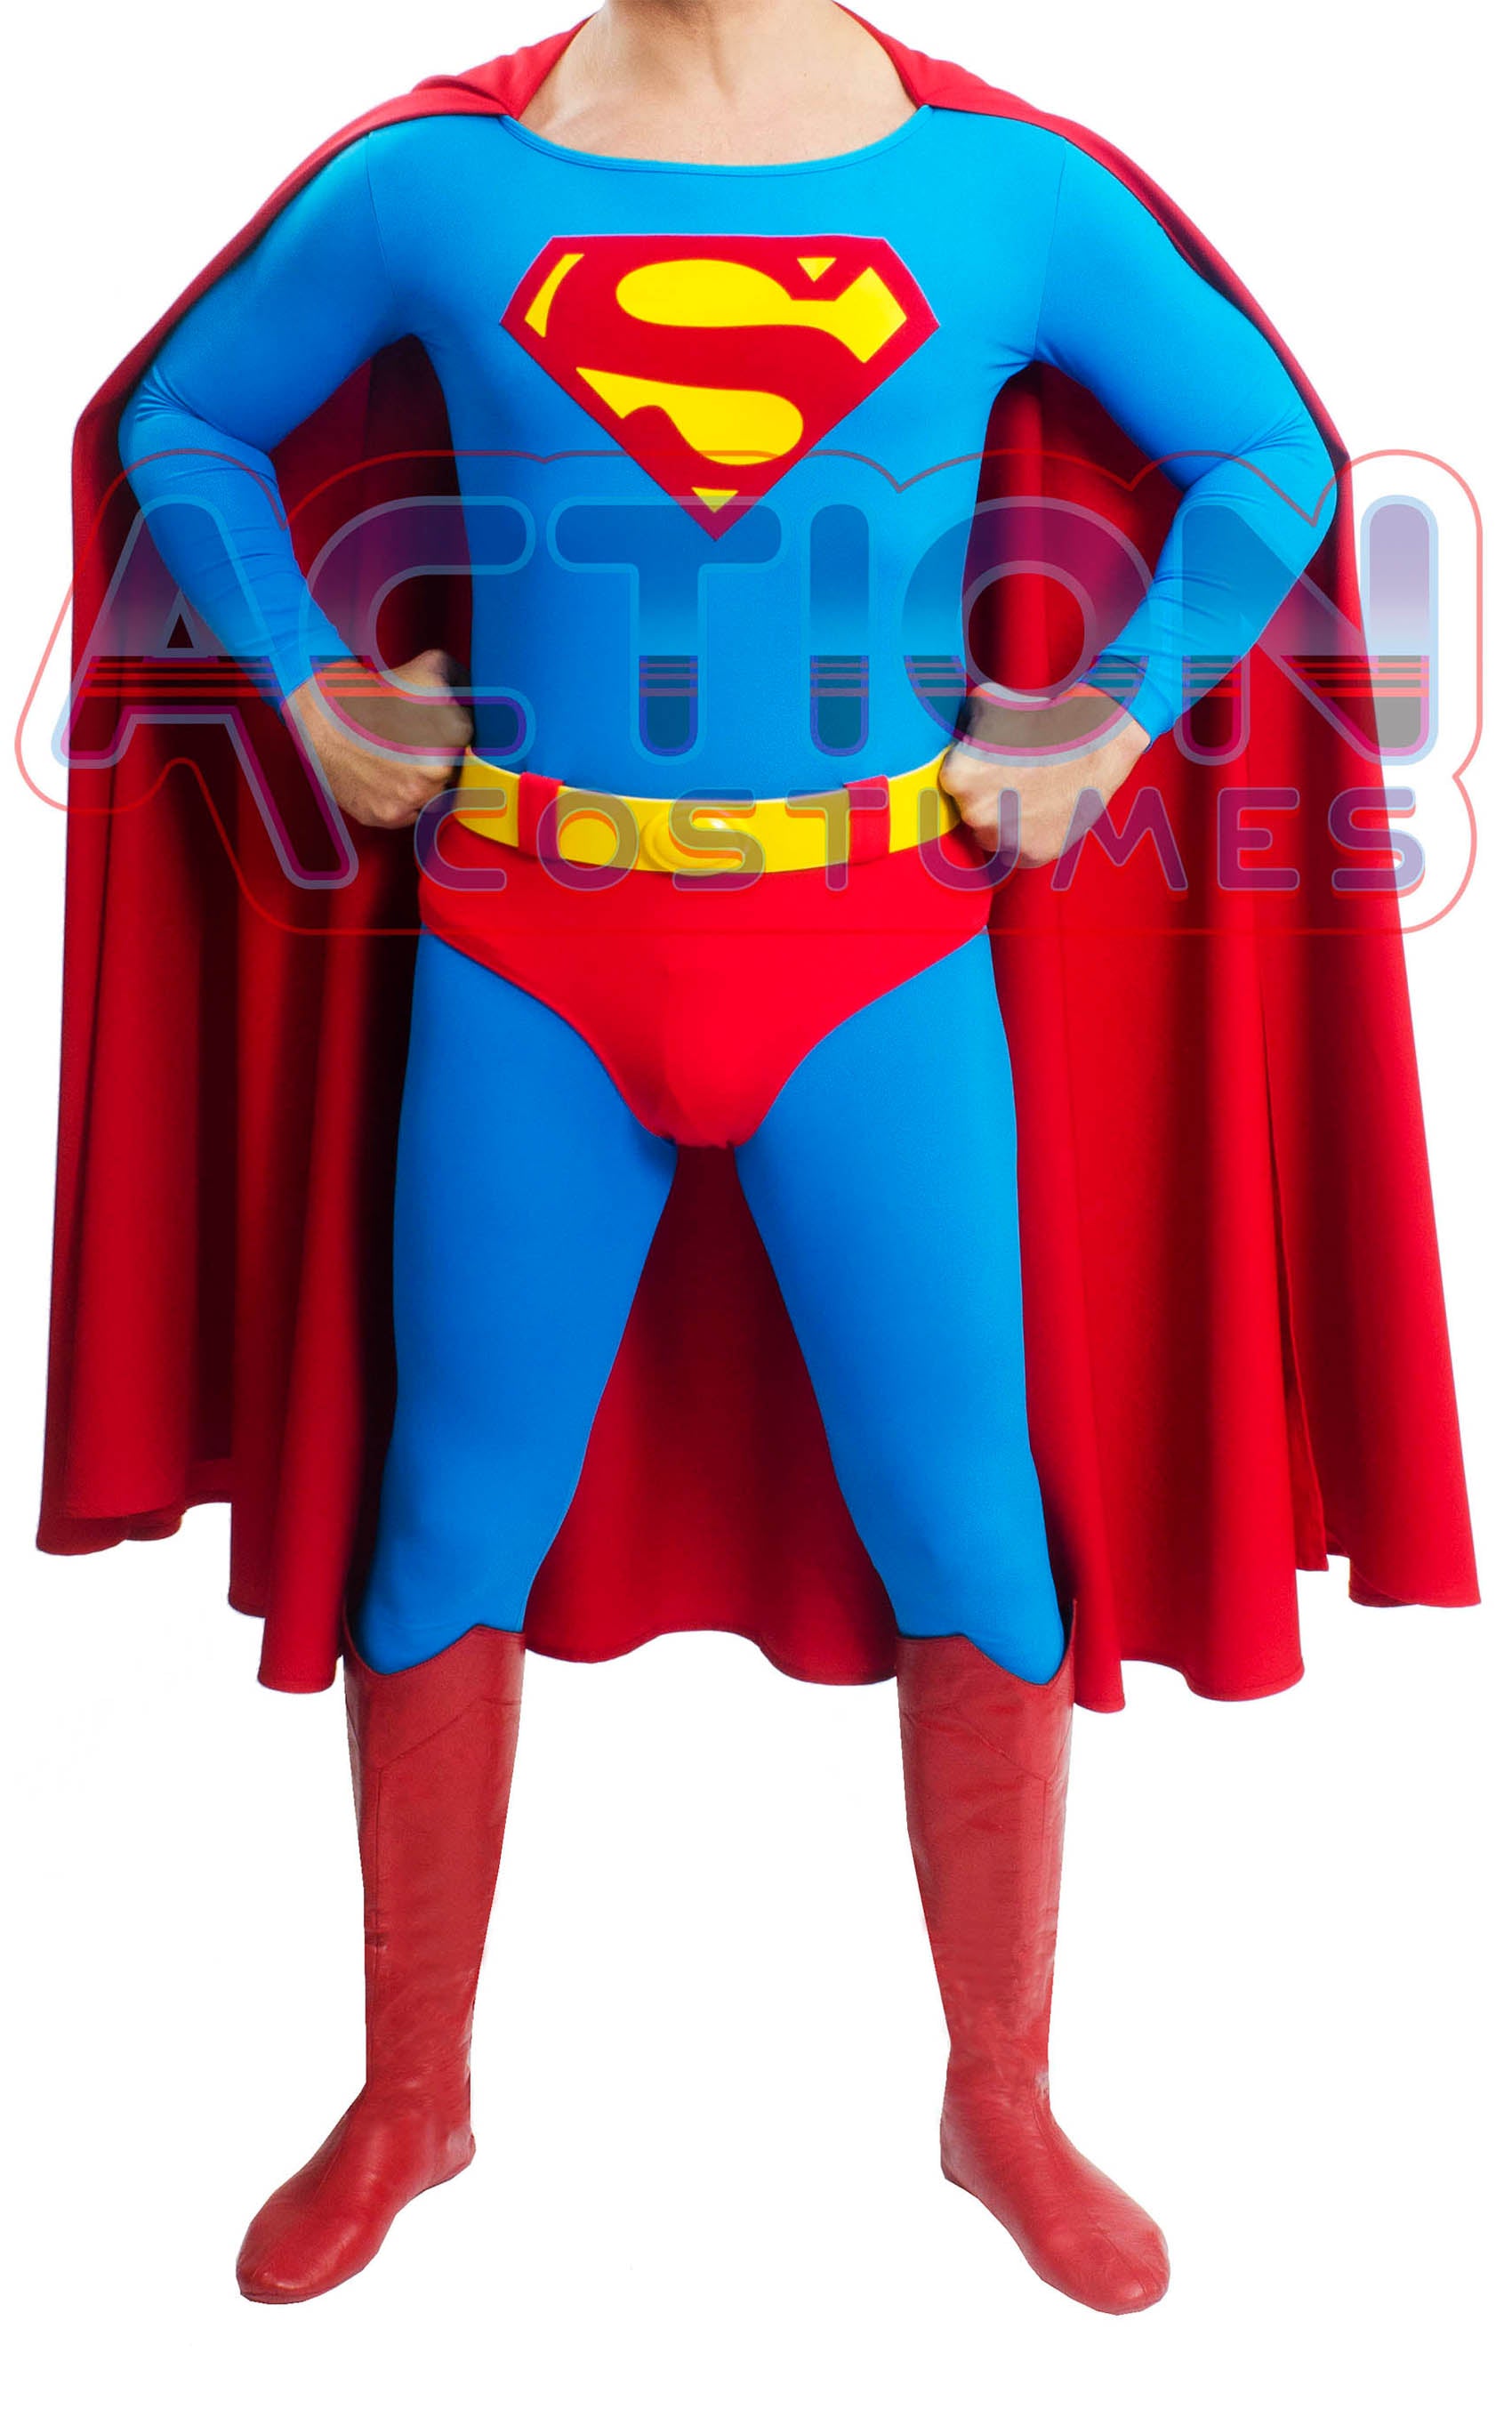 superman-costume-80-s-style-m-size-ready-to-ship